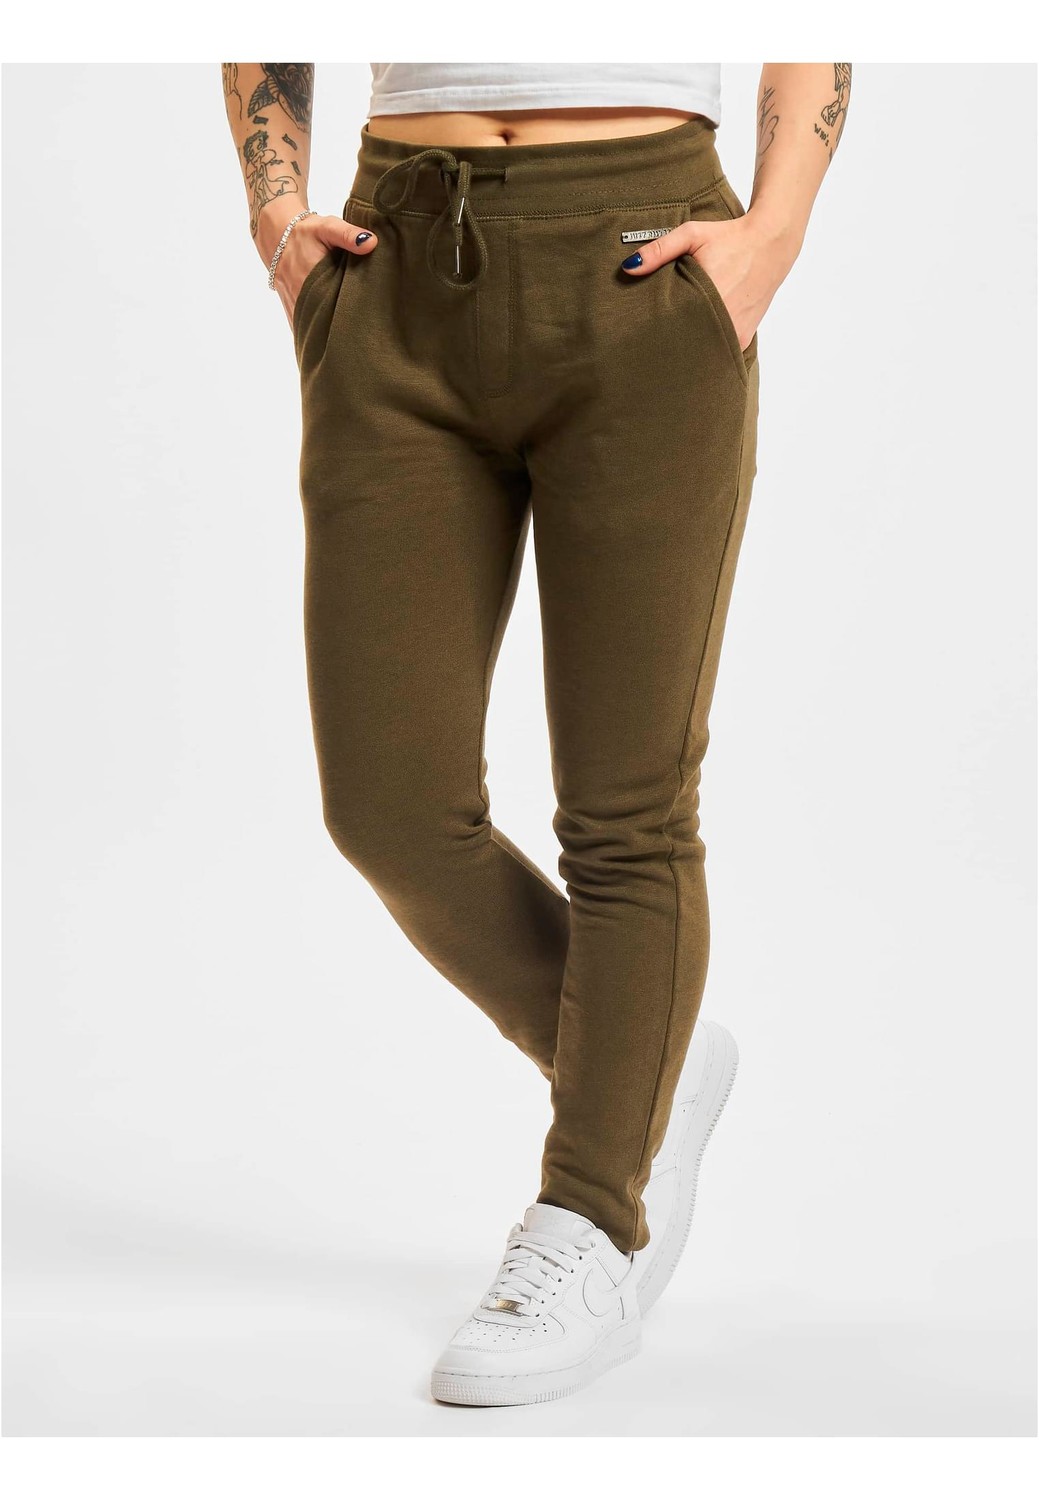 Just Rhyse Poppy Sweat Pants Olive olive